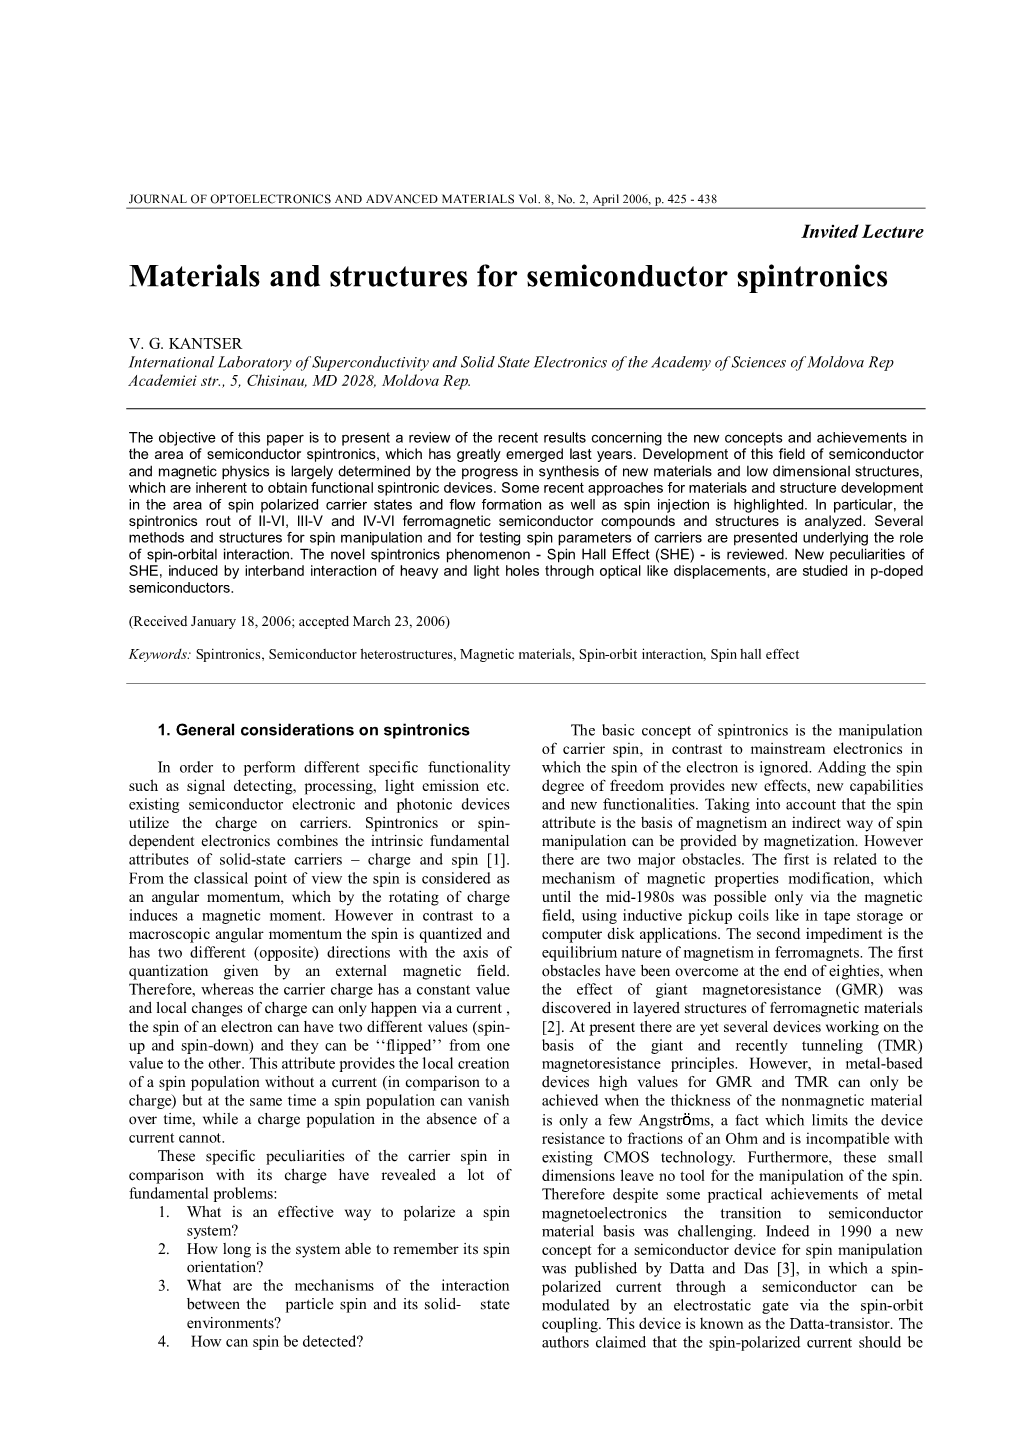 Materials and Structures for Semiconductor Spintronics